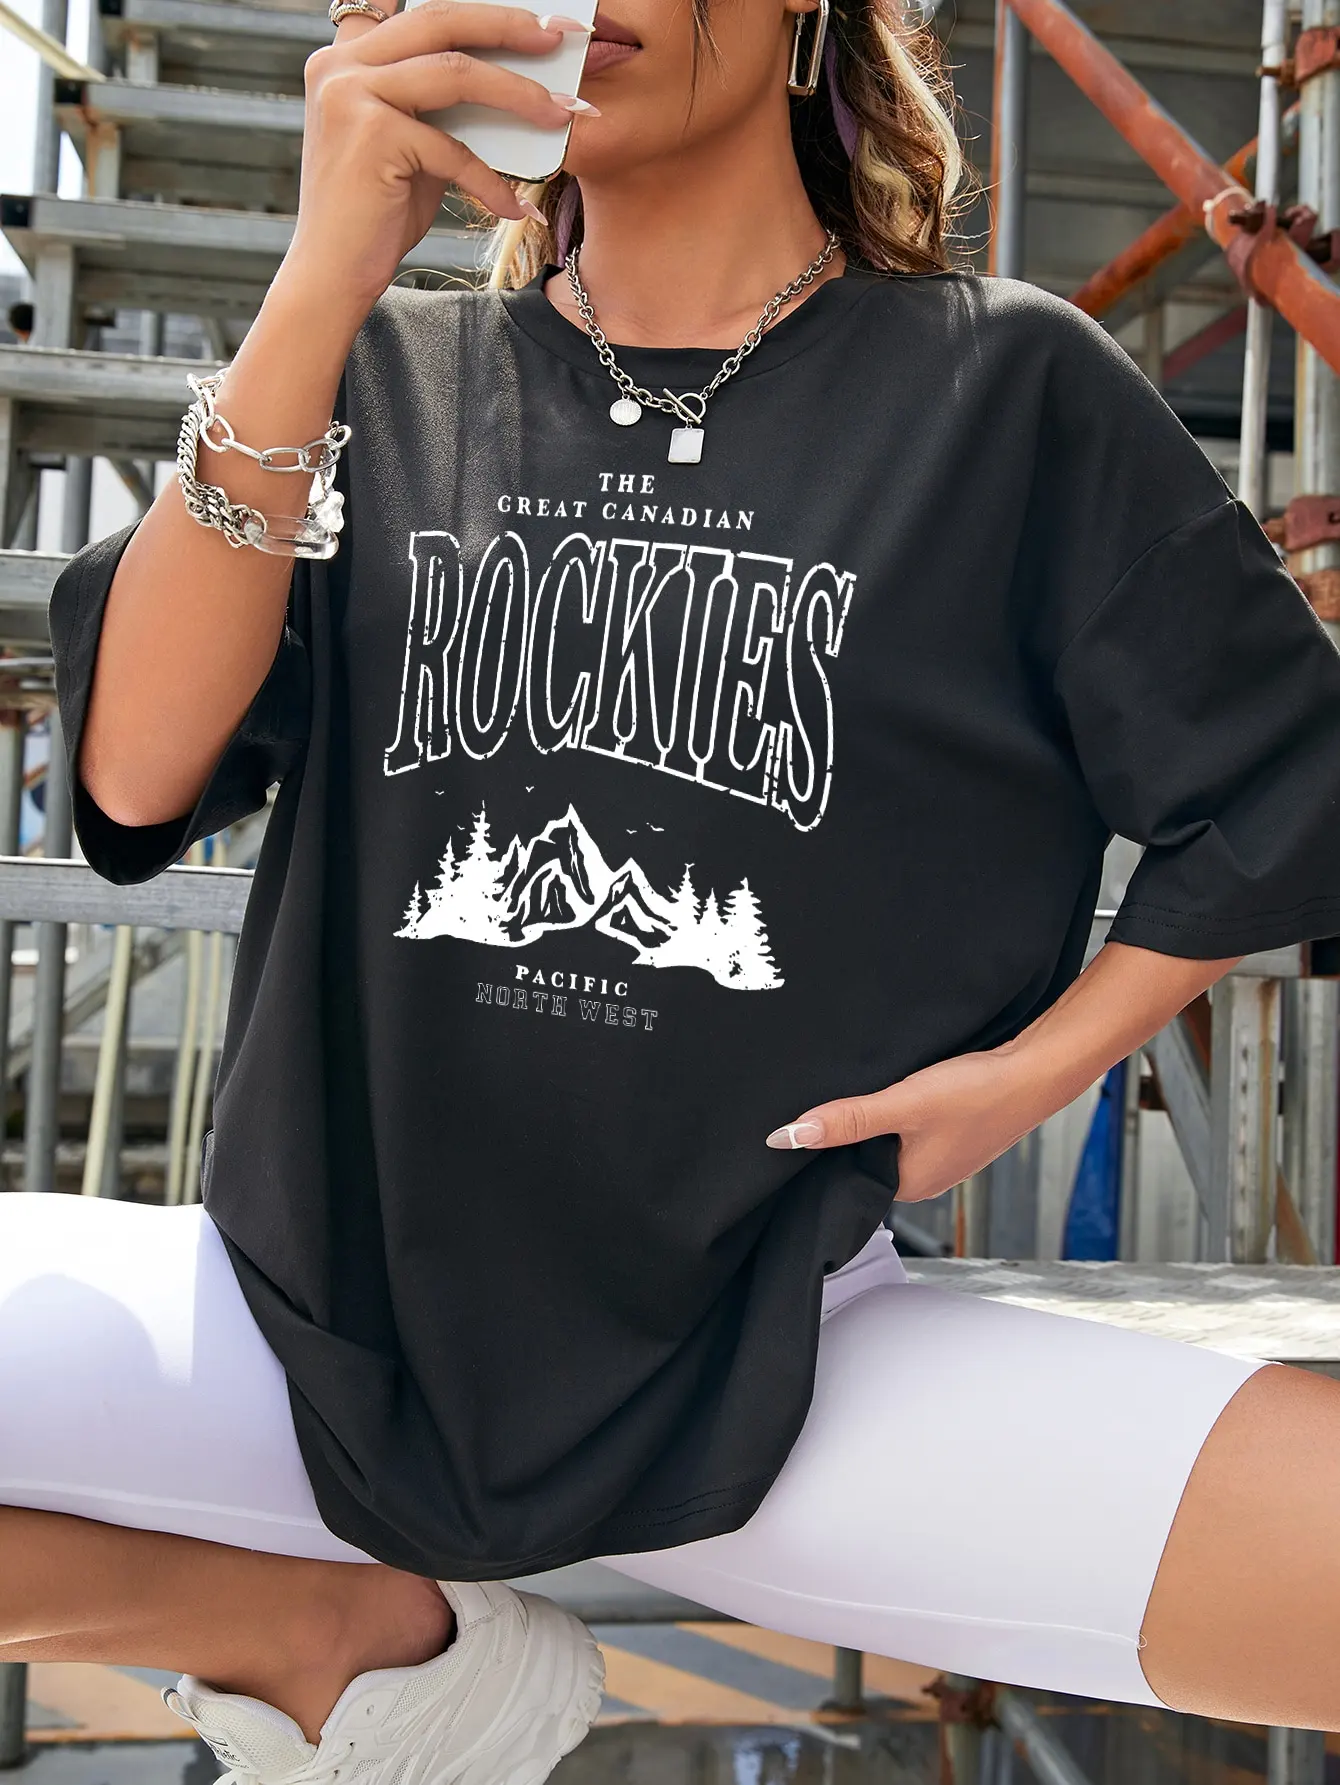 The Great Canadian Rockies Prints T-Shirt Woman Cotton Oversized Tee Shirts  Fashion Quality T Shirts Comfortable Outdoor Tshirt